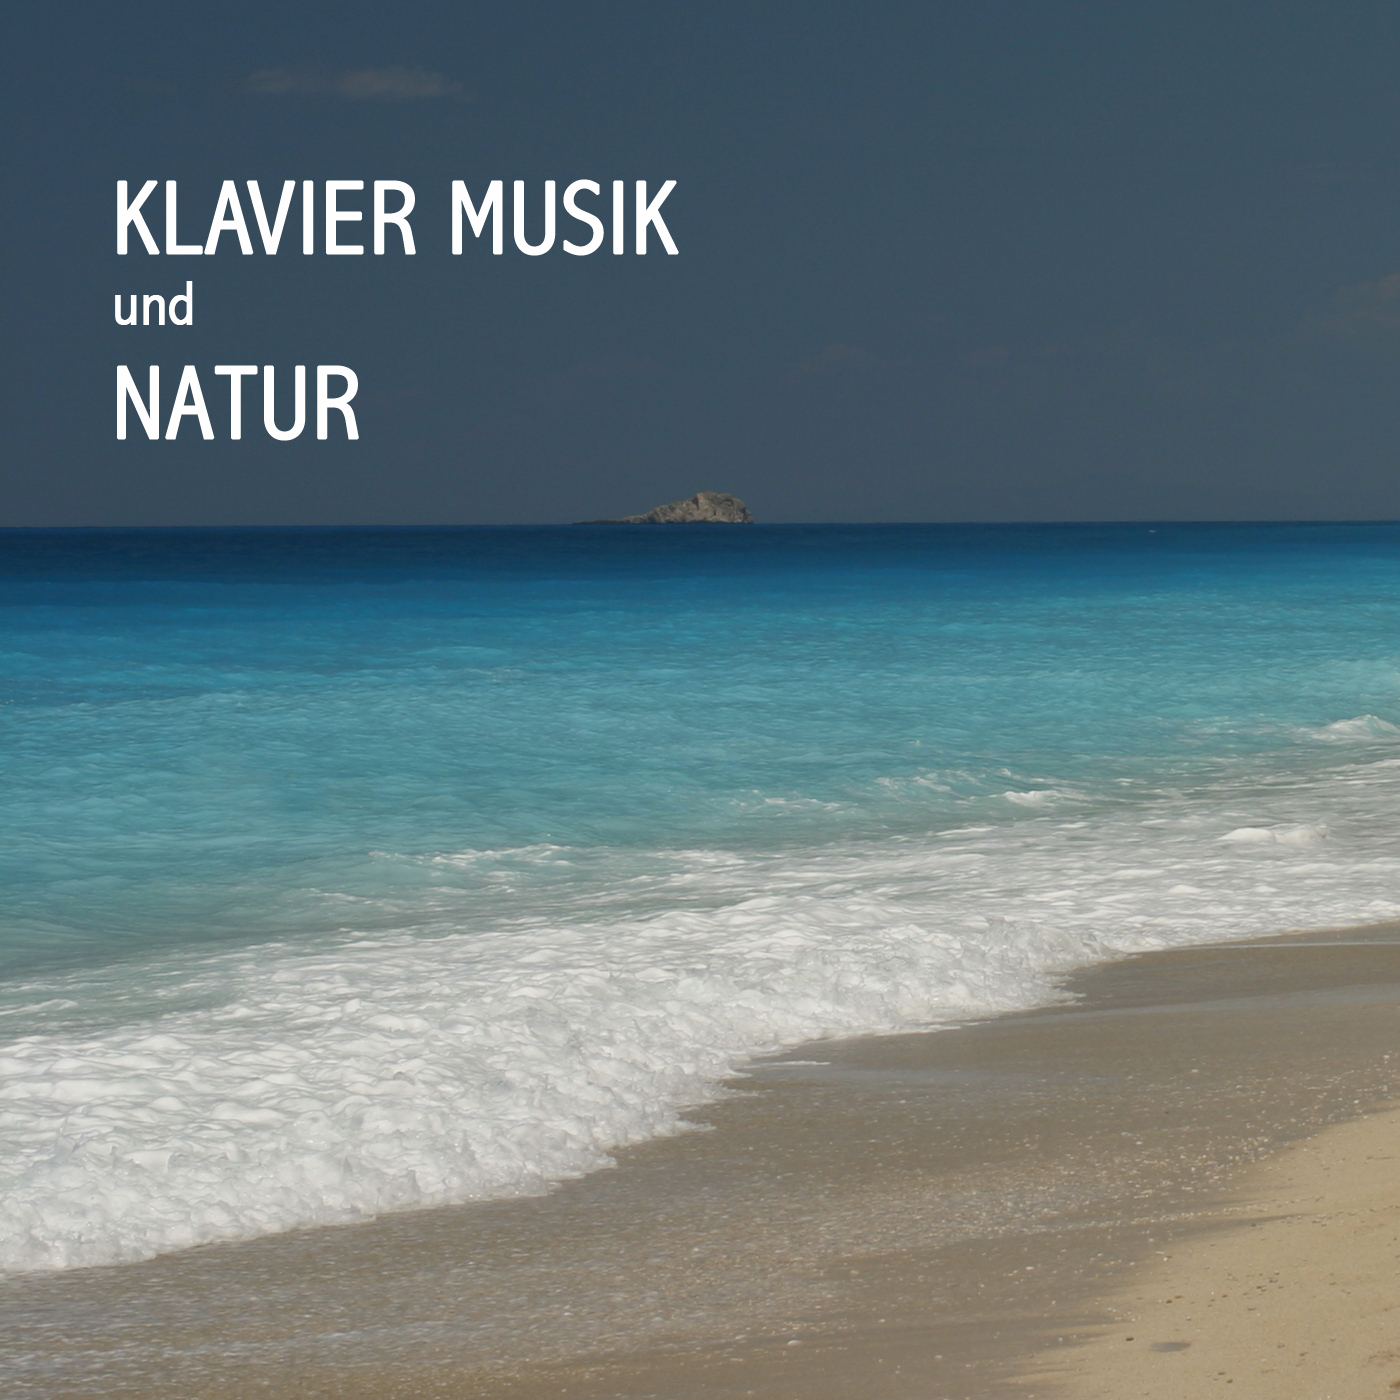 Woman - Music Piano and Sound of Nature with Sea Waves and Beach Stream